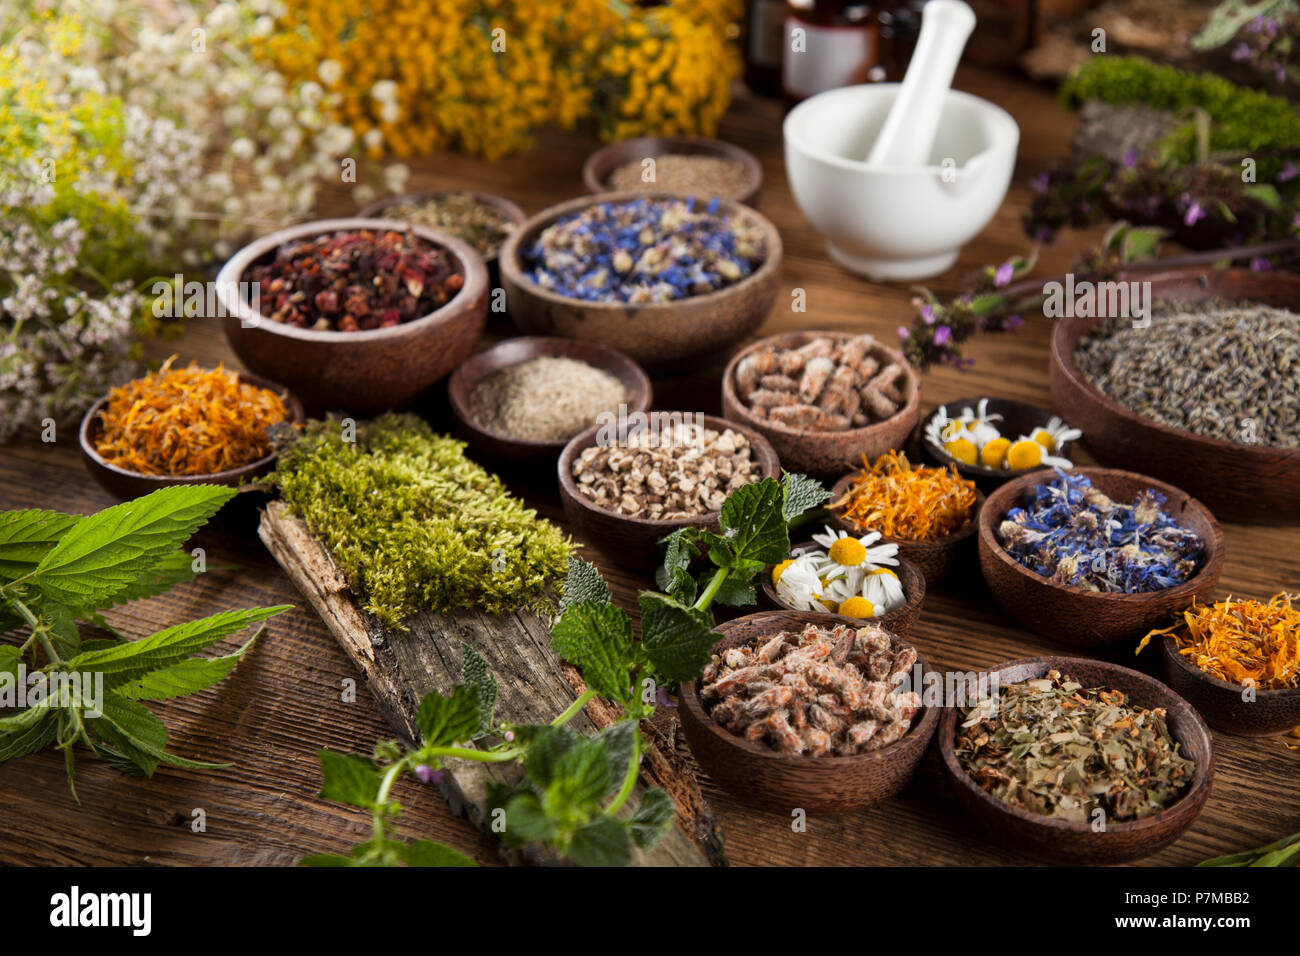 Natural remedy and mortar, healing herbs background Stock Photo - Alamy